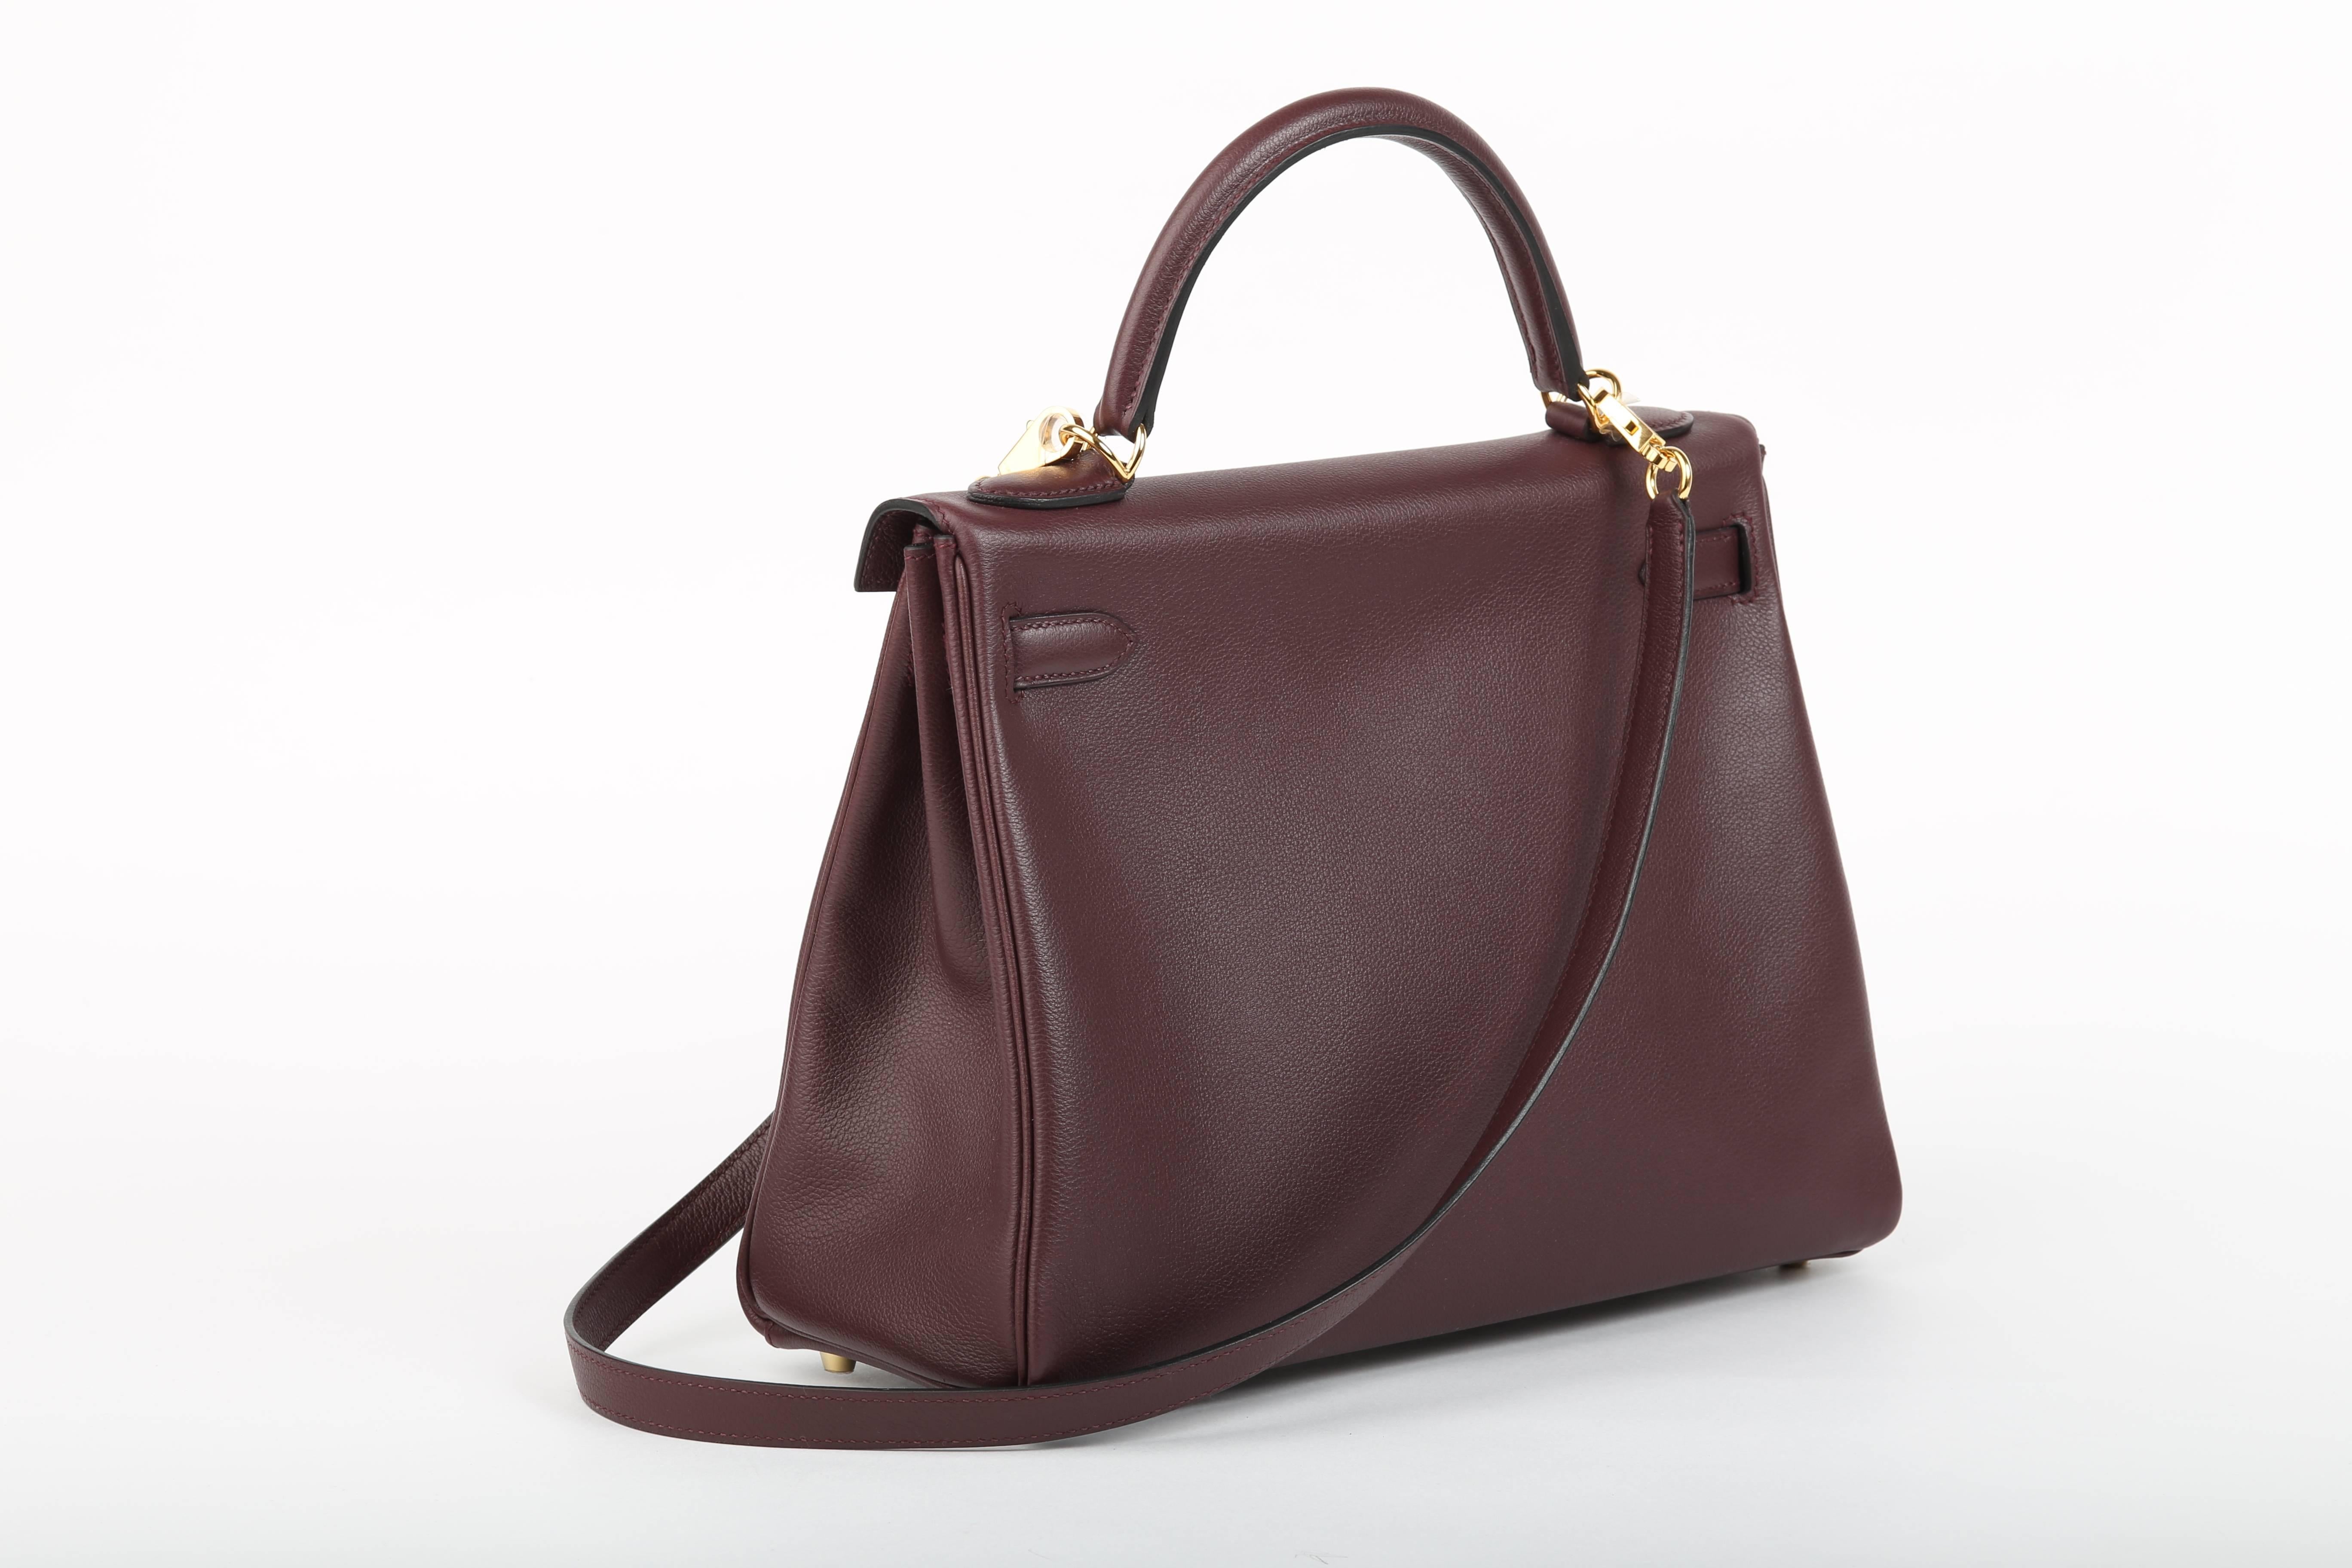 Hermes Kelly 32 cm in Prune, an incredible shade of deep purple, this Violet brings elegance, delivering a daily dose of beauty to your outfit! 
This Kelly is a Retourne shape, which has a more relaxed shape. During the manufacturing process the